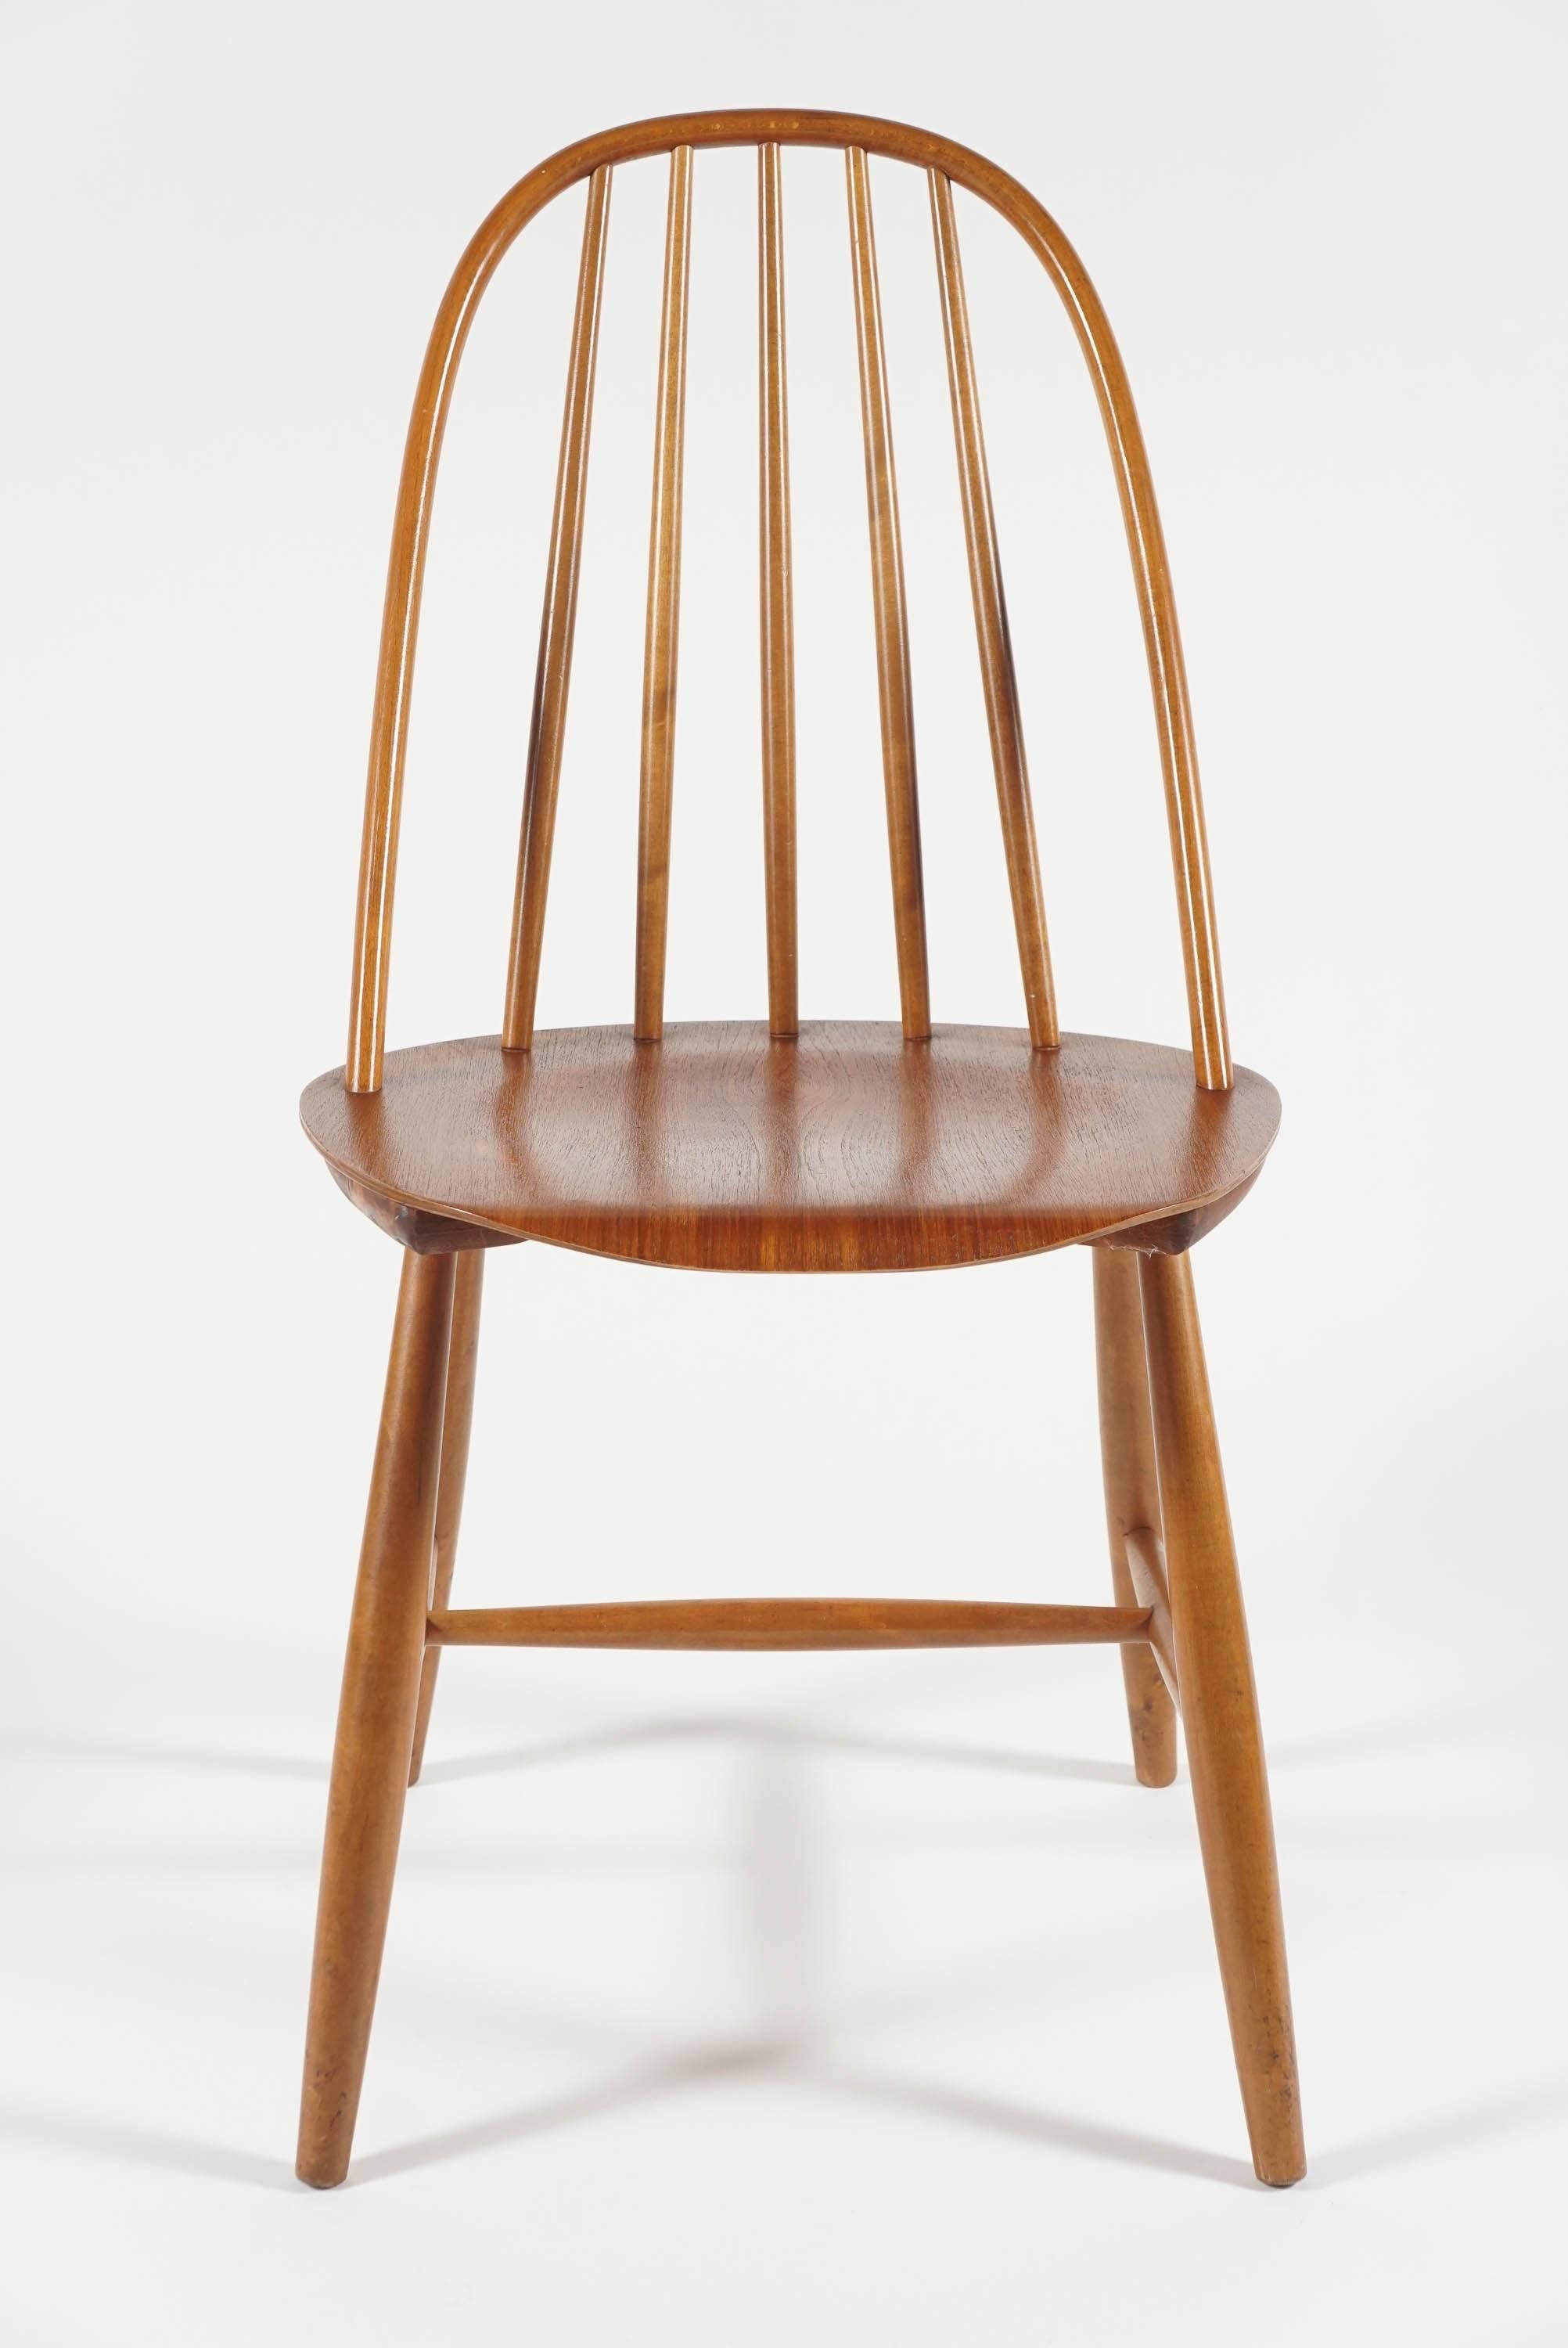 Beautifully proportioned wood side chair. Great for a desk or as a small accent chair.